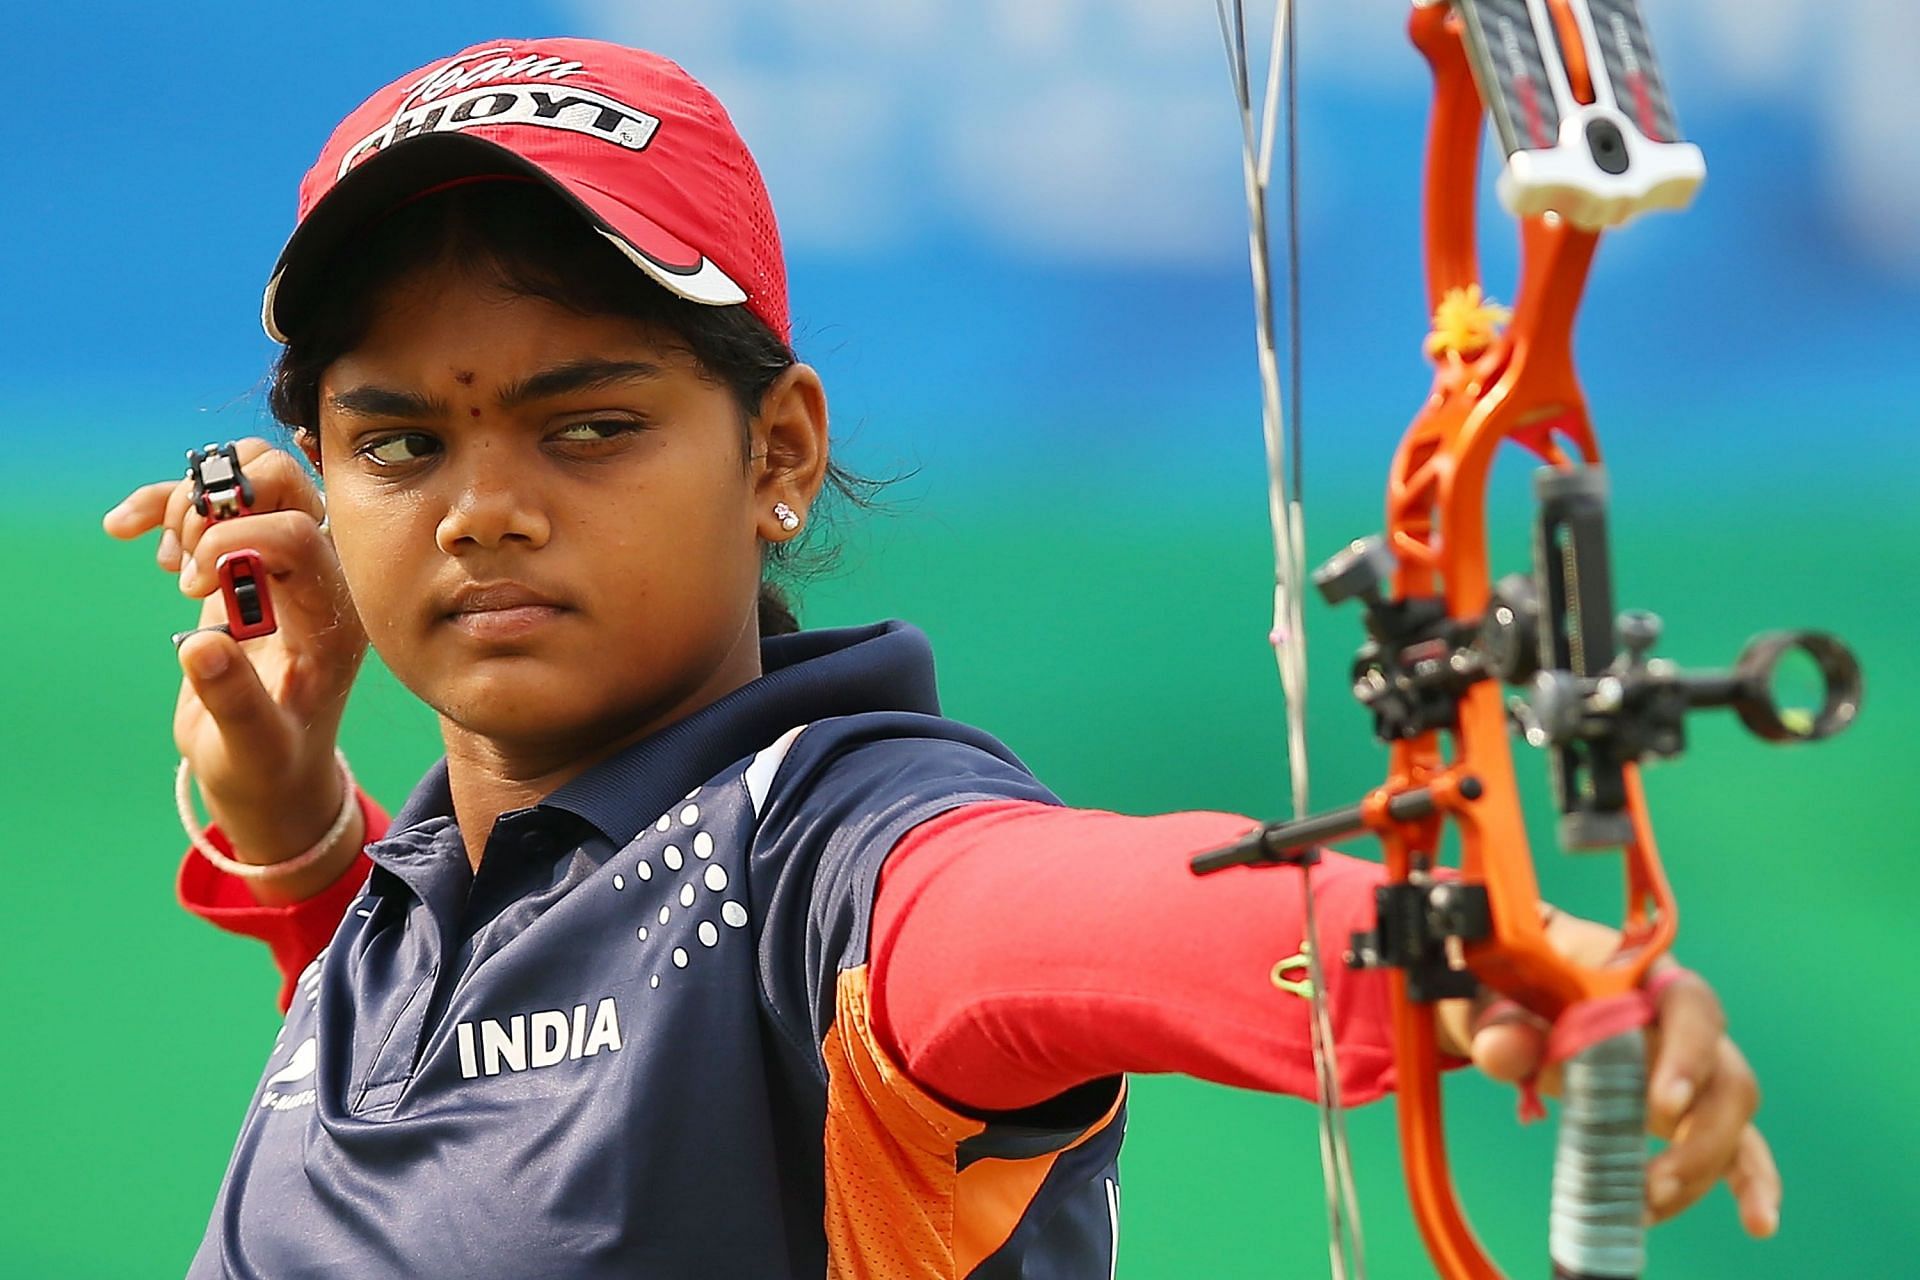 Jyothi Surekha Vennam equalled the world record in the qualification round [File Photo]